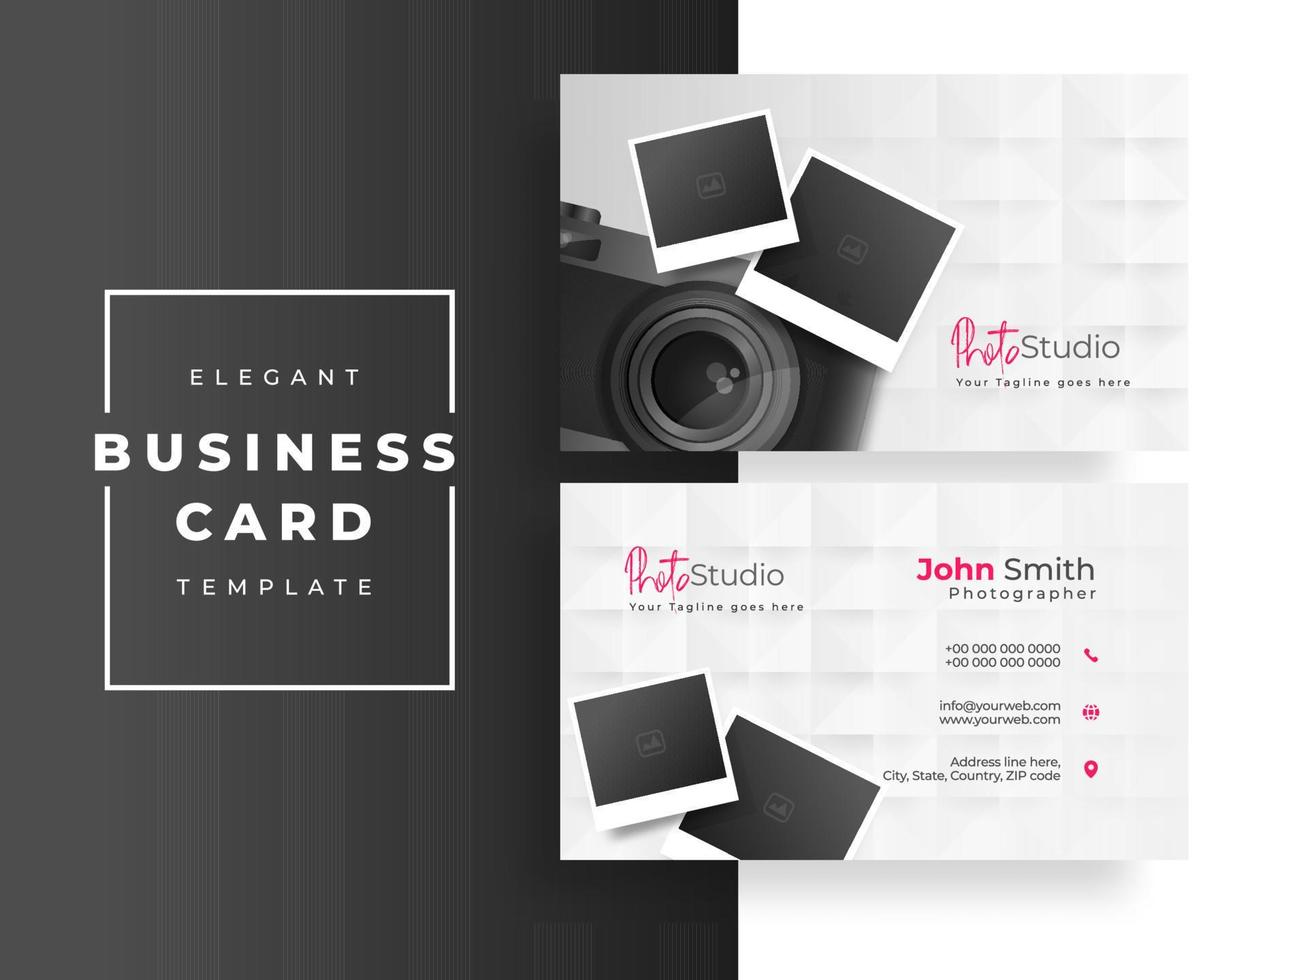 Photo Studio business card or visiting card design with camera and photographs on white seamless square pattern background. vector